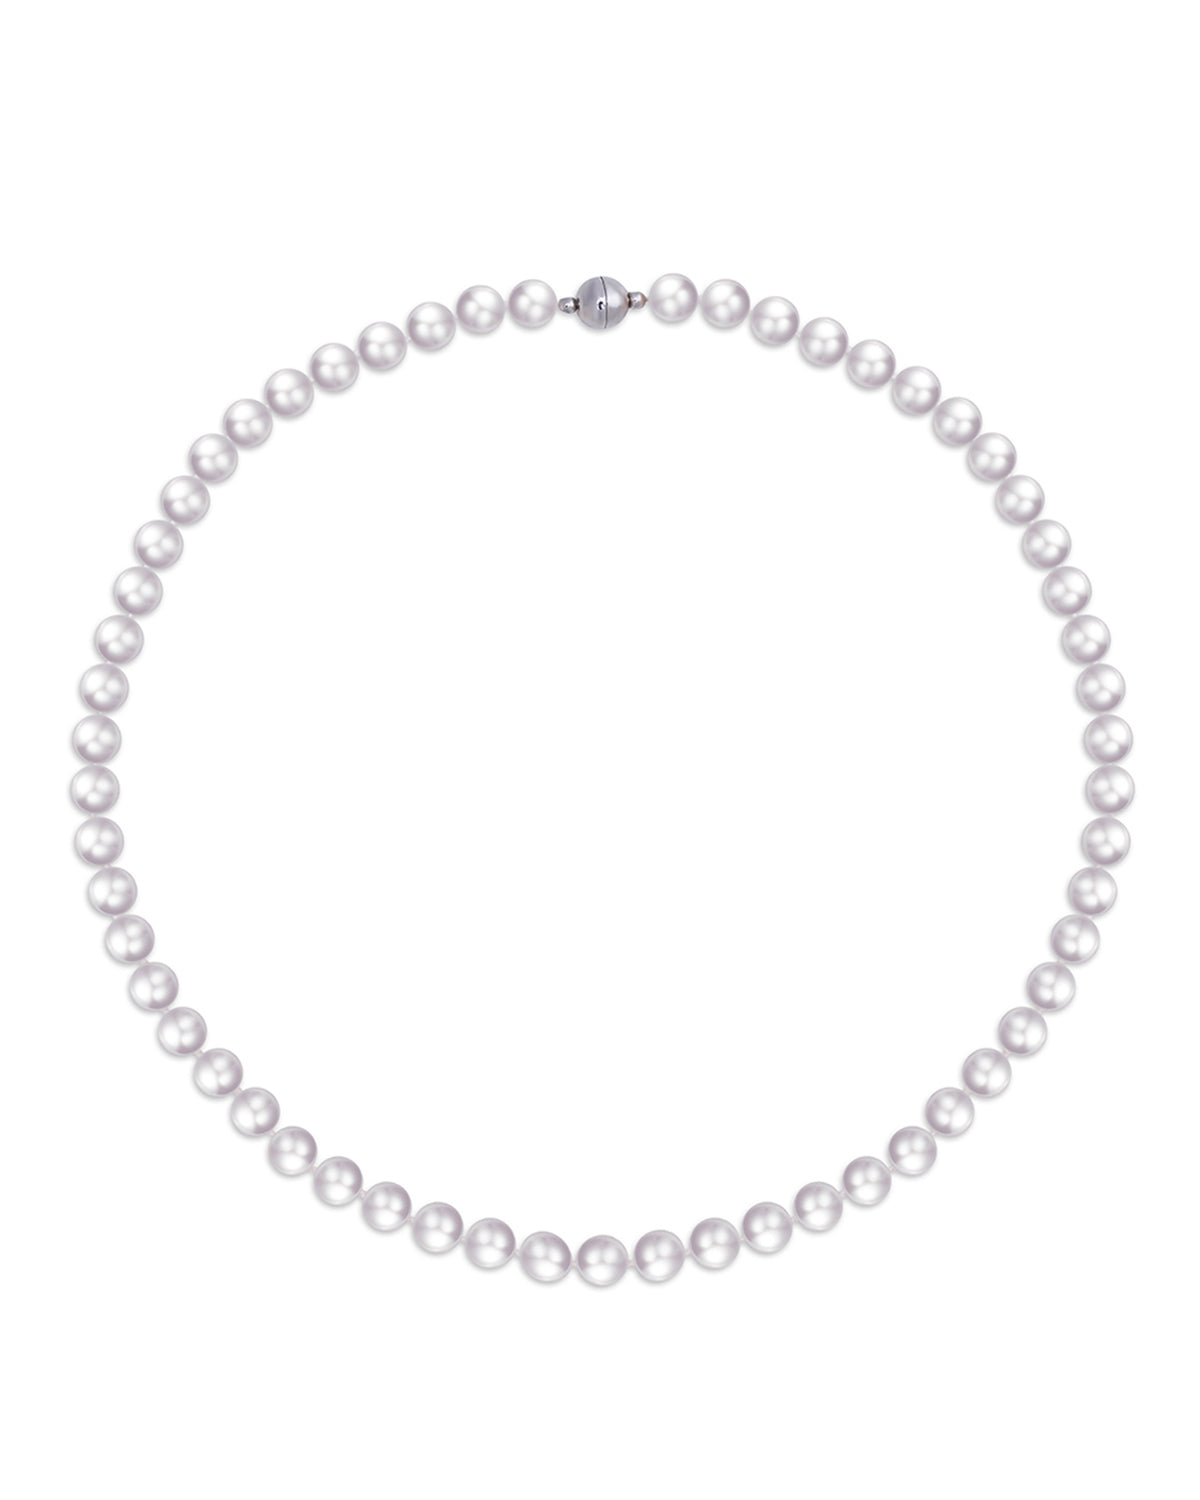 8.0-8.5mm White Freshwater Pearl Necklace - AAAA Quality - Preala Jewels #